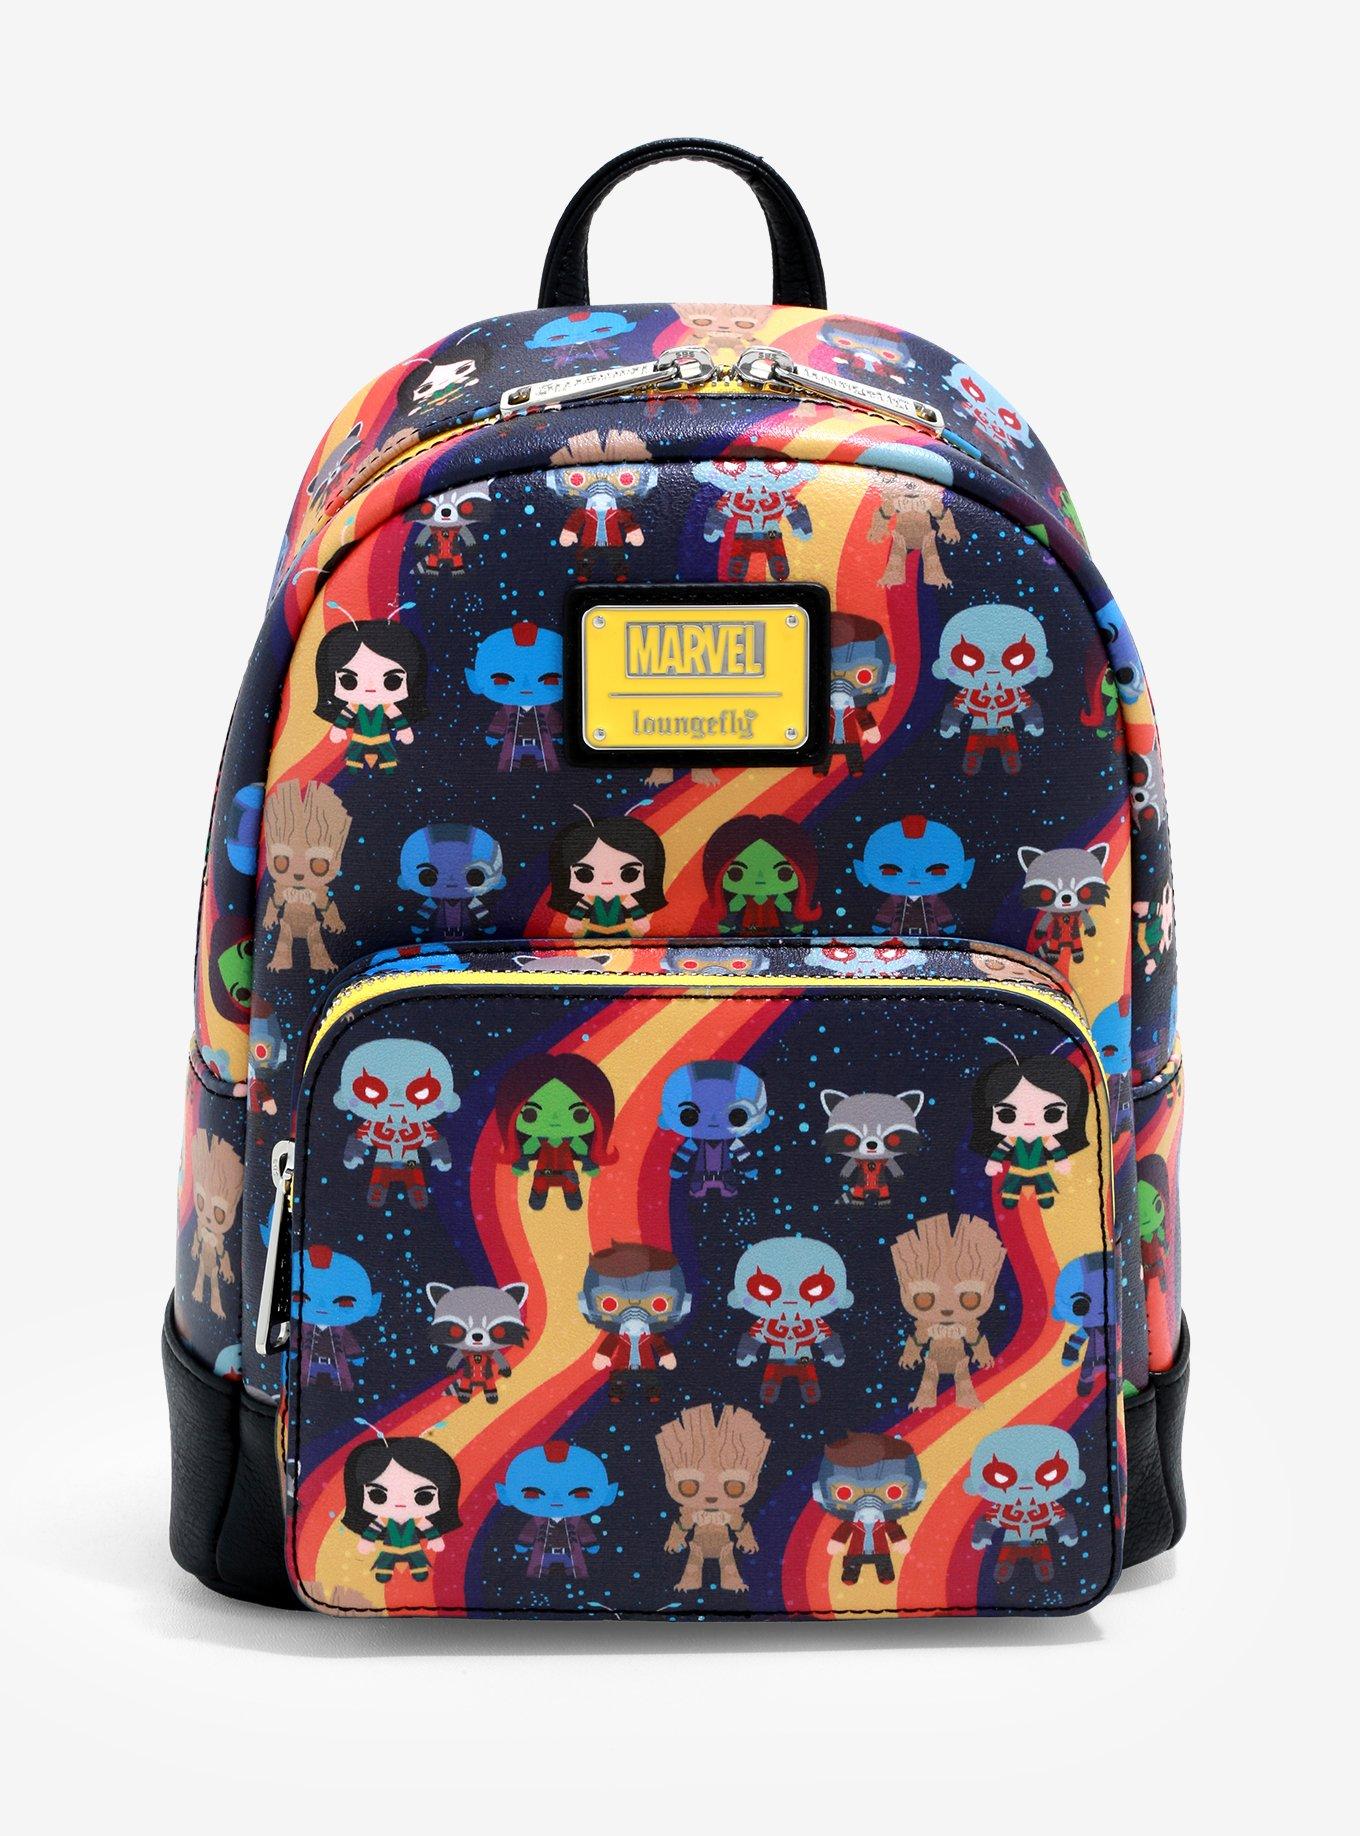 Loungefly Marvel Guardians Of The Galaxy Chibi Mini Backpack | Hot Topic